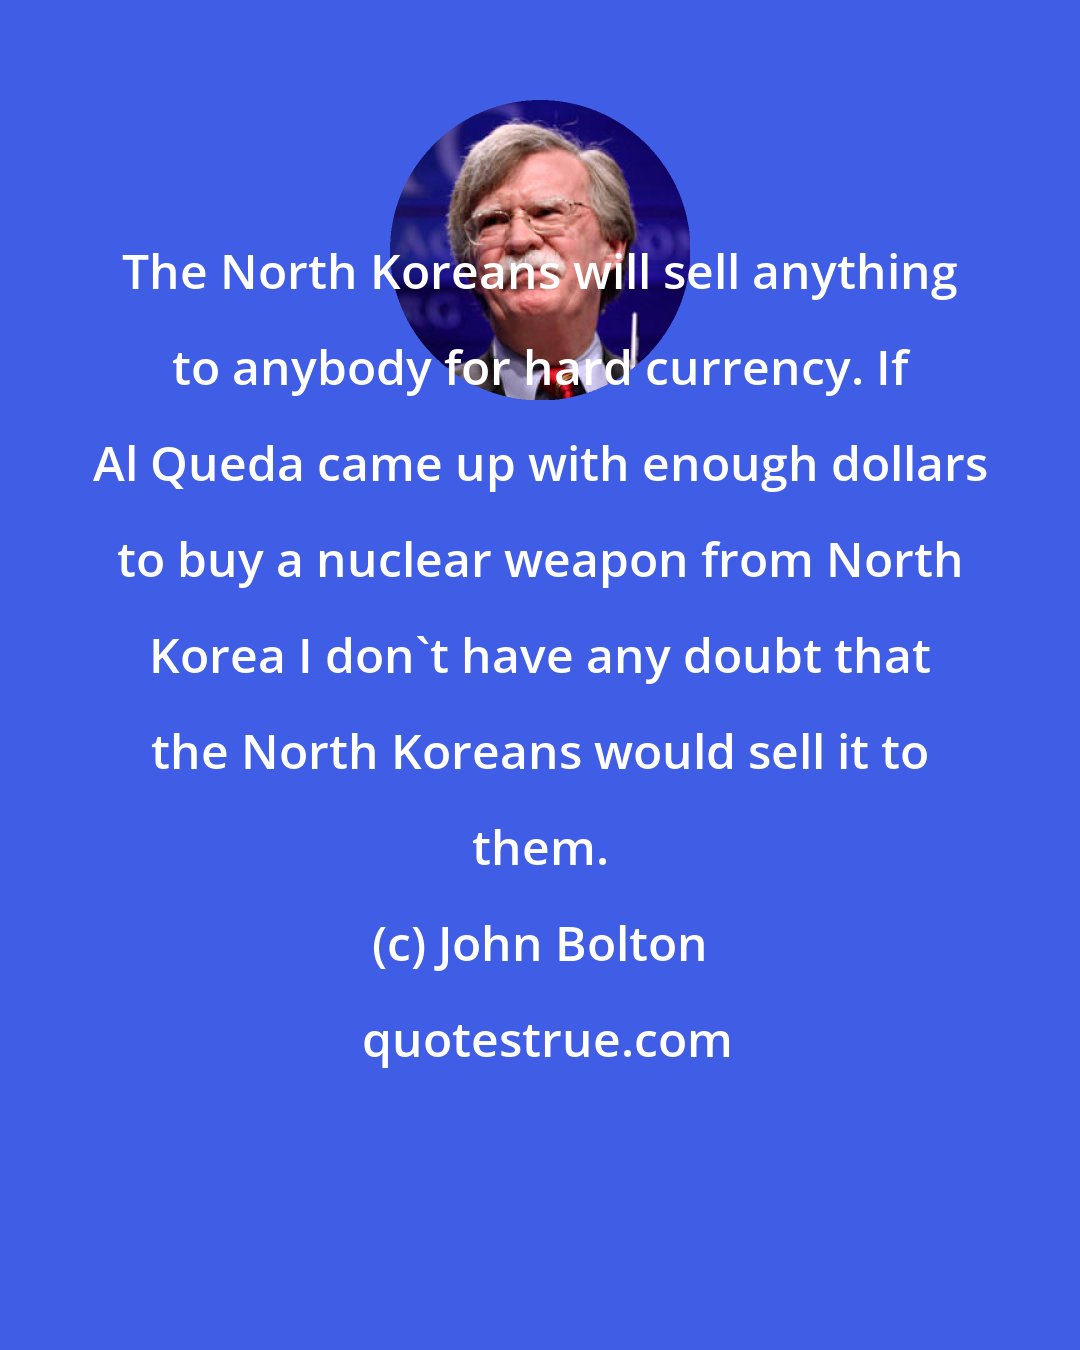 John Bolton: The North Koreans will sell anything to anybody for hard currency. If Al Queda came up with enough dollars to buy a nuclear weapon from North Korea I don't have any doubt that the North Koreans would sell it to them.